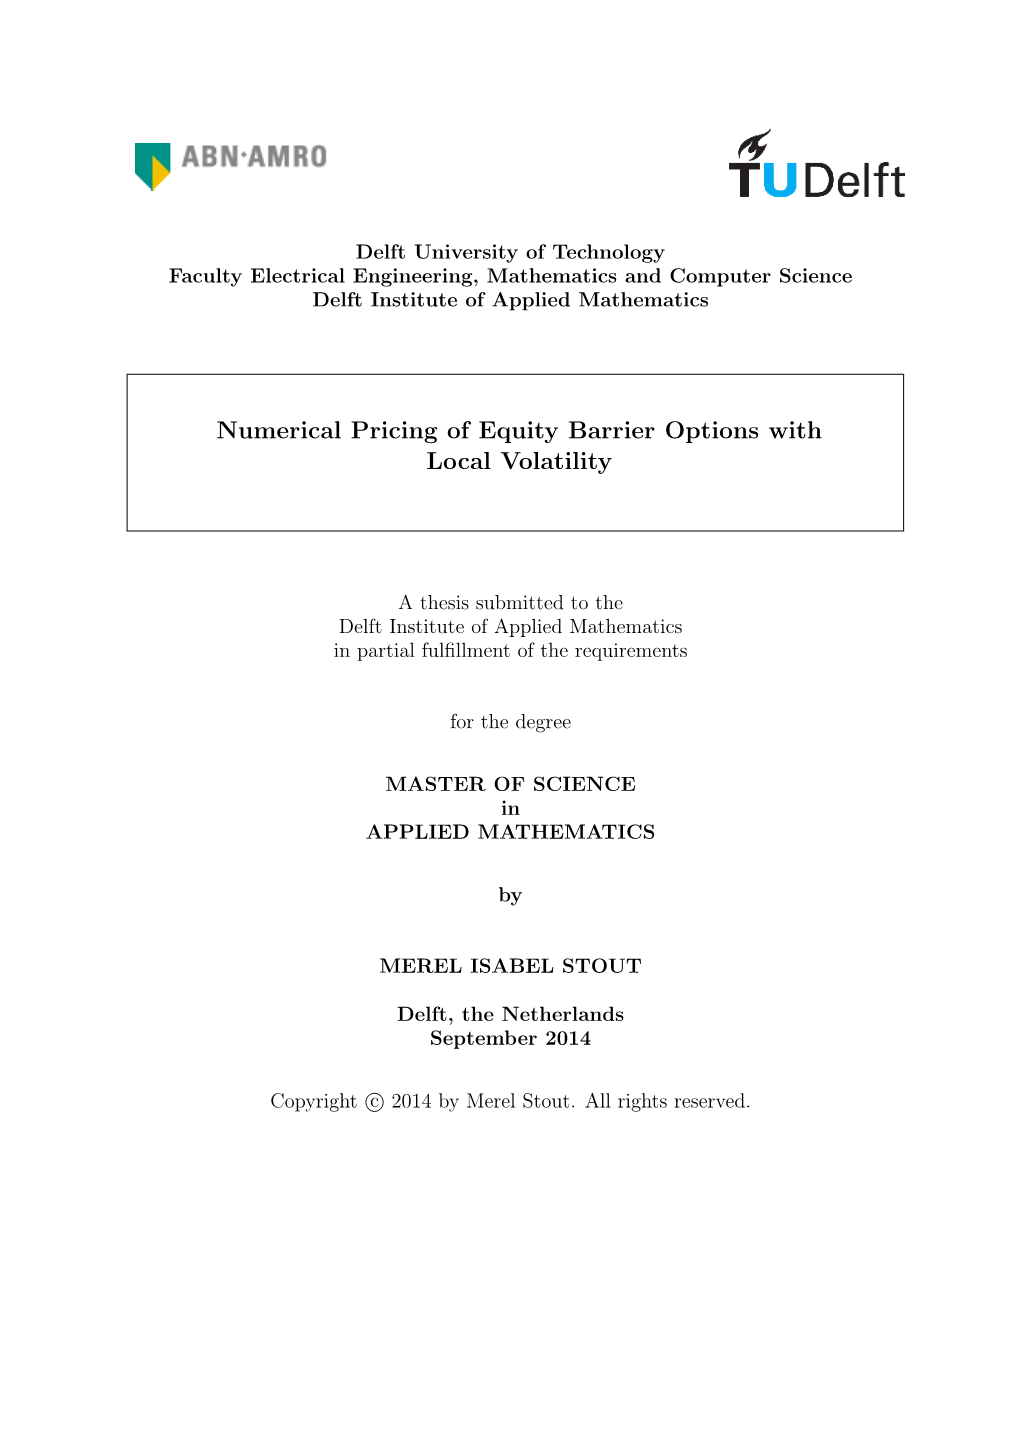 Numerical Pricing of Equity Barrier Options with Local Volatility